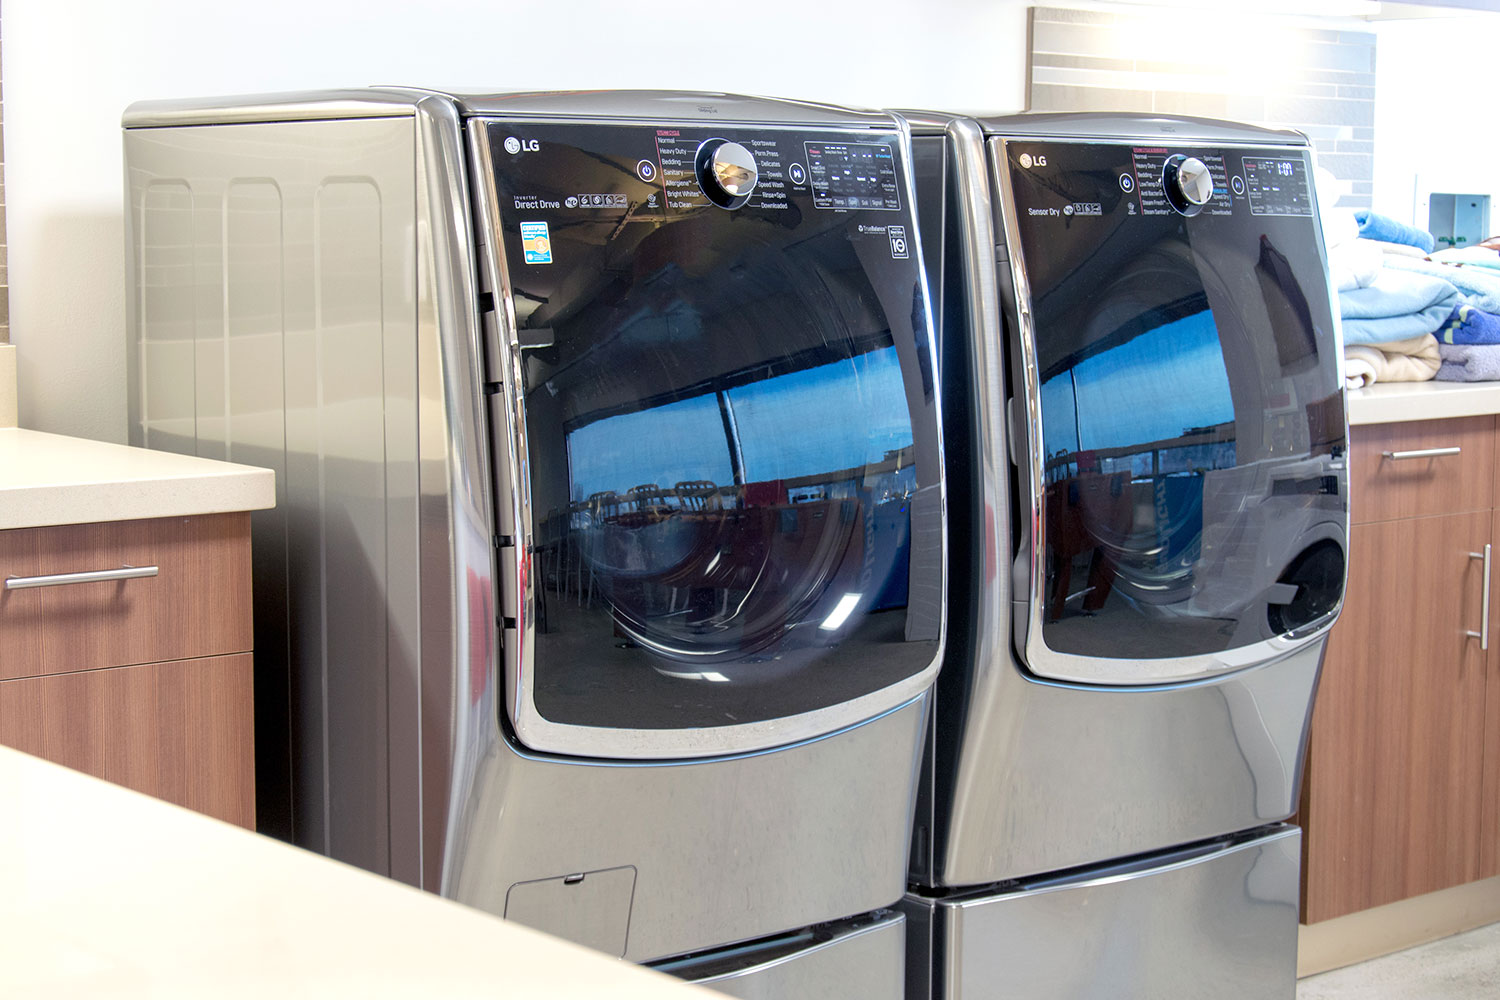 LG WASHING MACHINES WITH ARTIFICIAL INTELLIGENCE AND DIRECT DRIVE